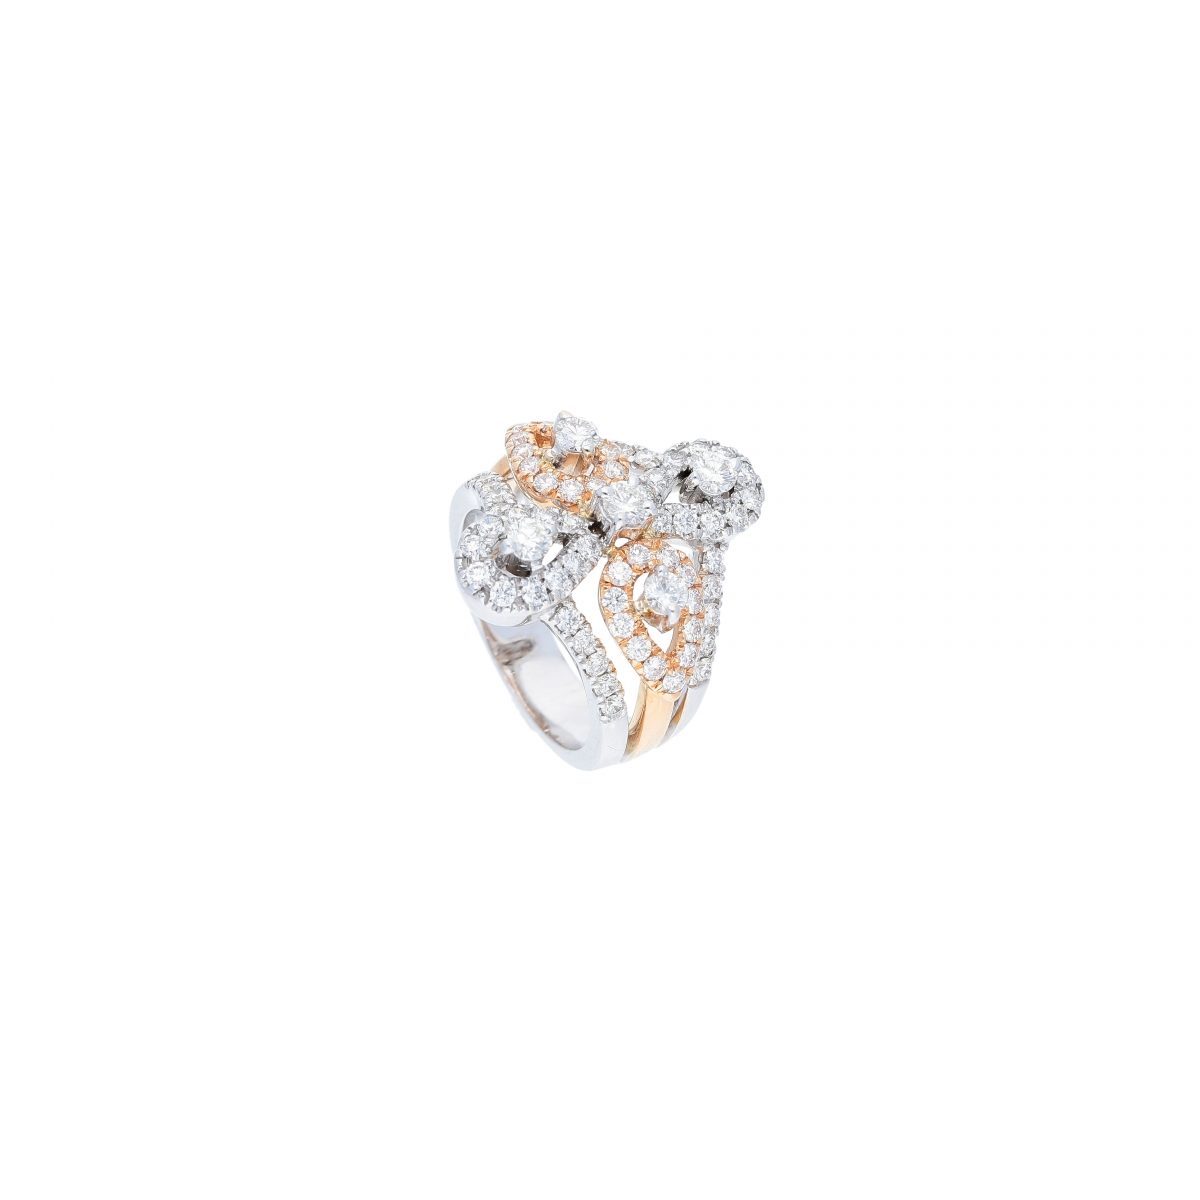 Idylle Blossom ring, 3 golds and diamonds - Jewelry - Categories